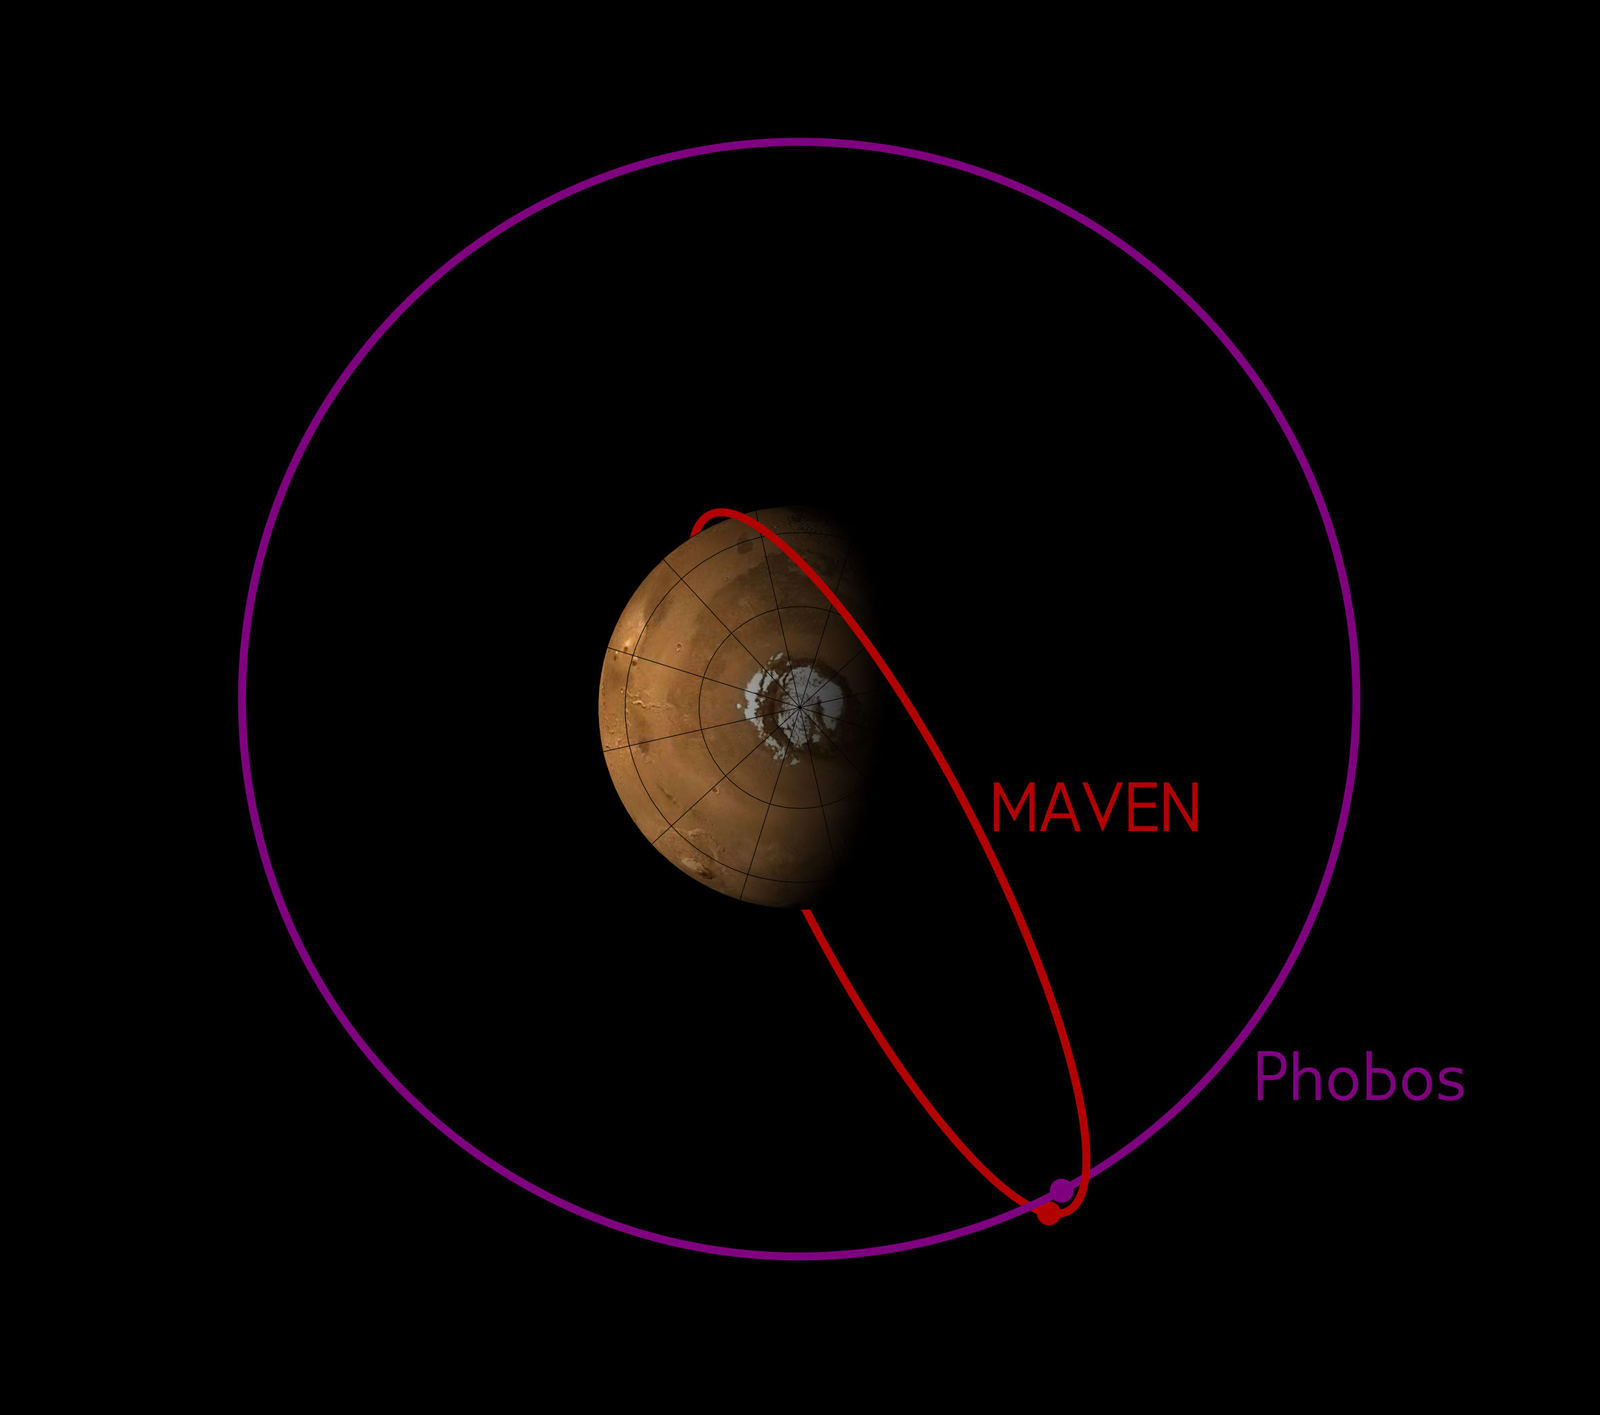 The orbit of MAVEN sometimes crosses the orbit of Phobos. This image shows the configuration of the two orbits in early December 2015, when MAVEN's Phobos observations were made.